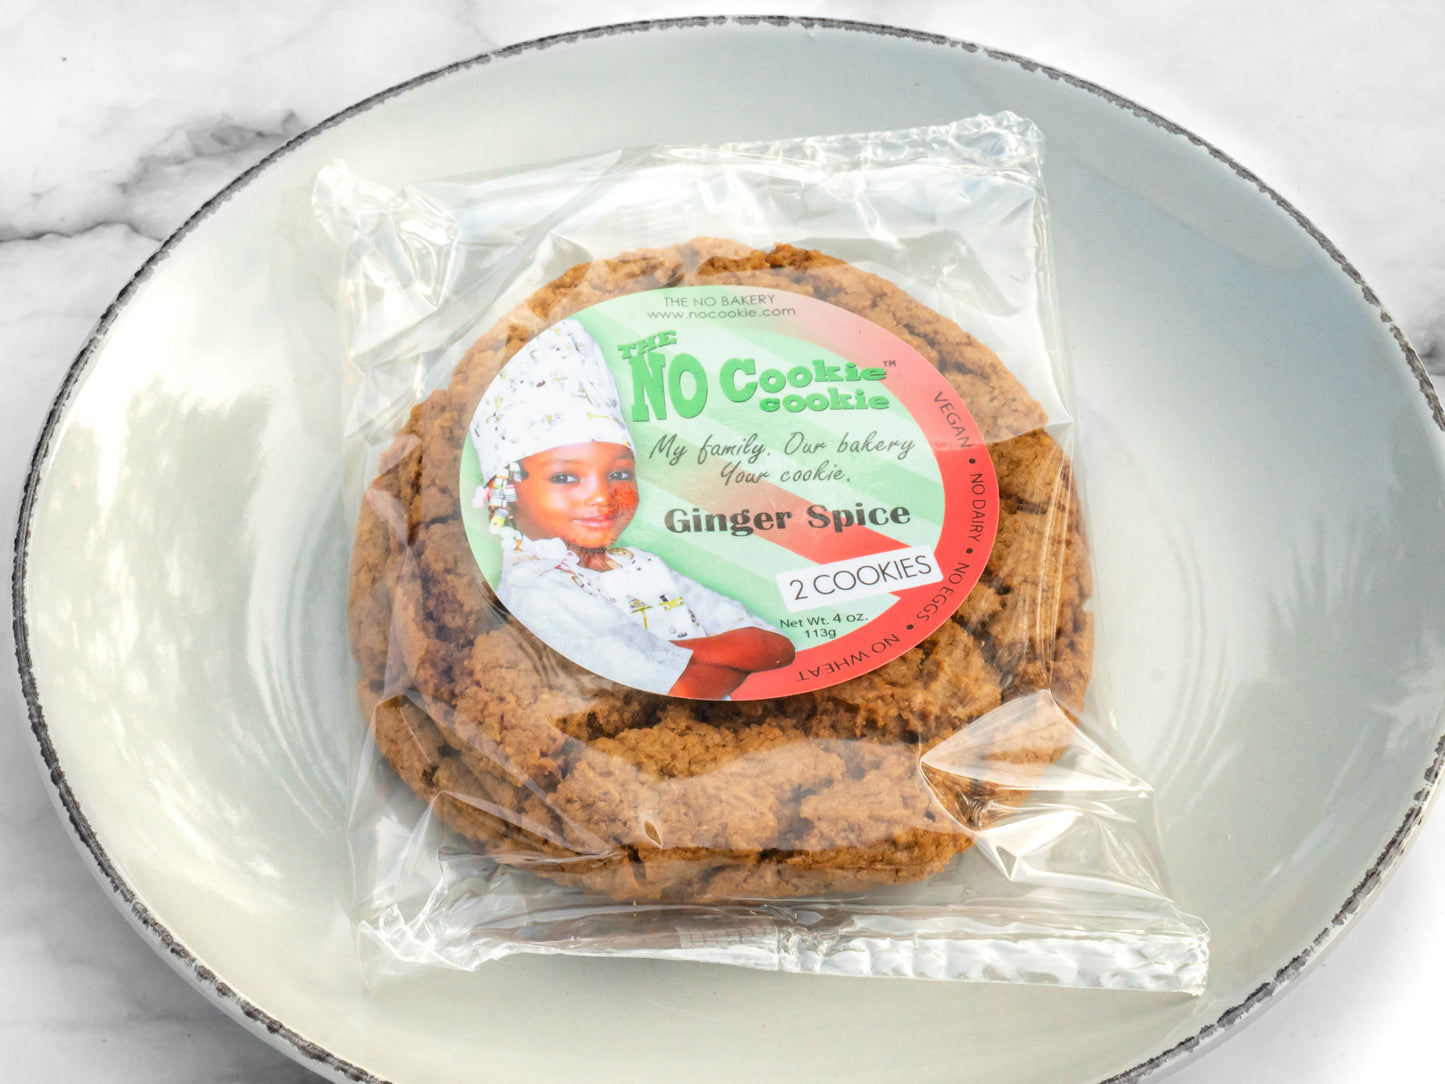 Ginger Spice Cookie - The No Cookie Cookie